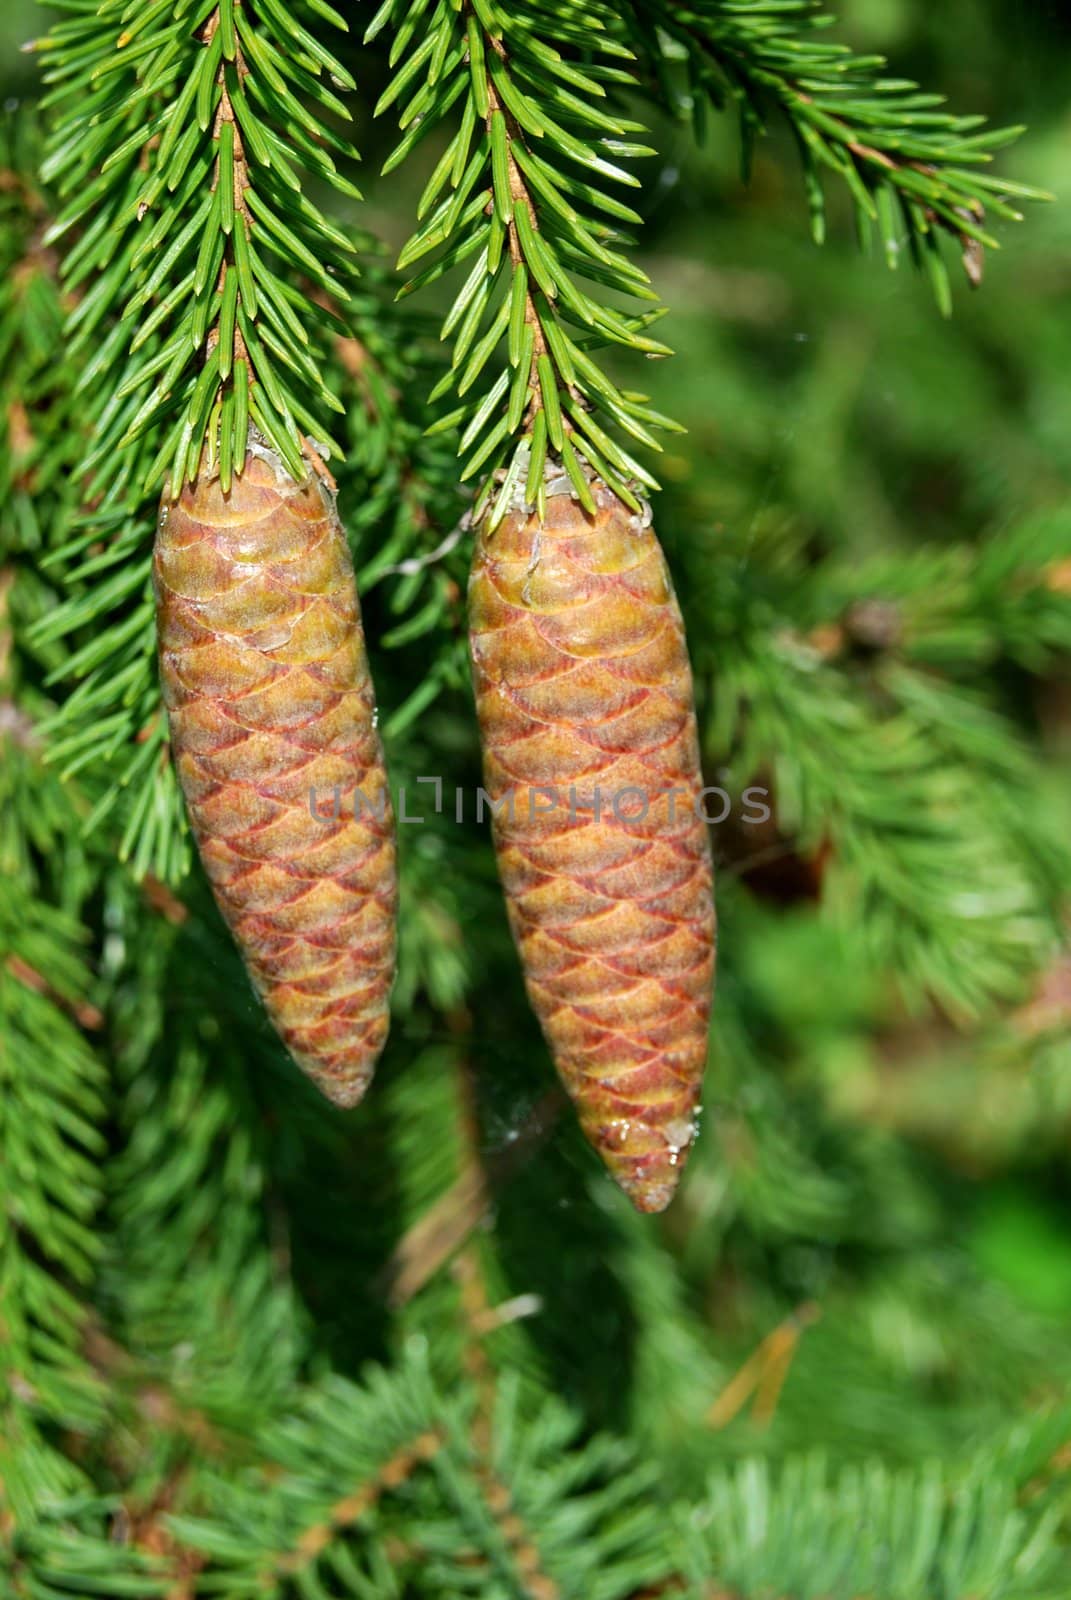 large fir tree cones in front of green needles